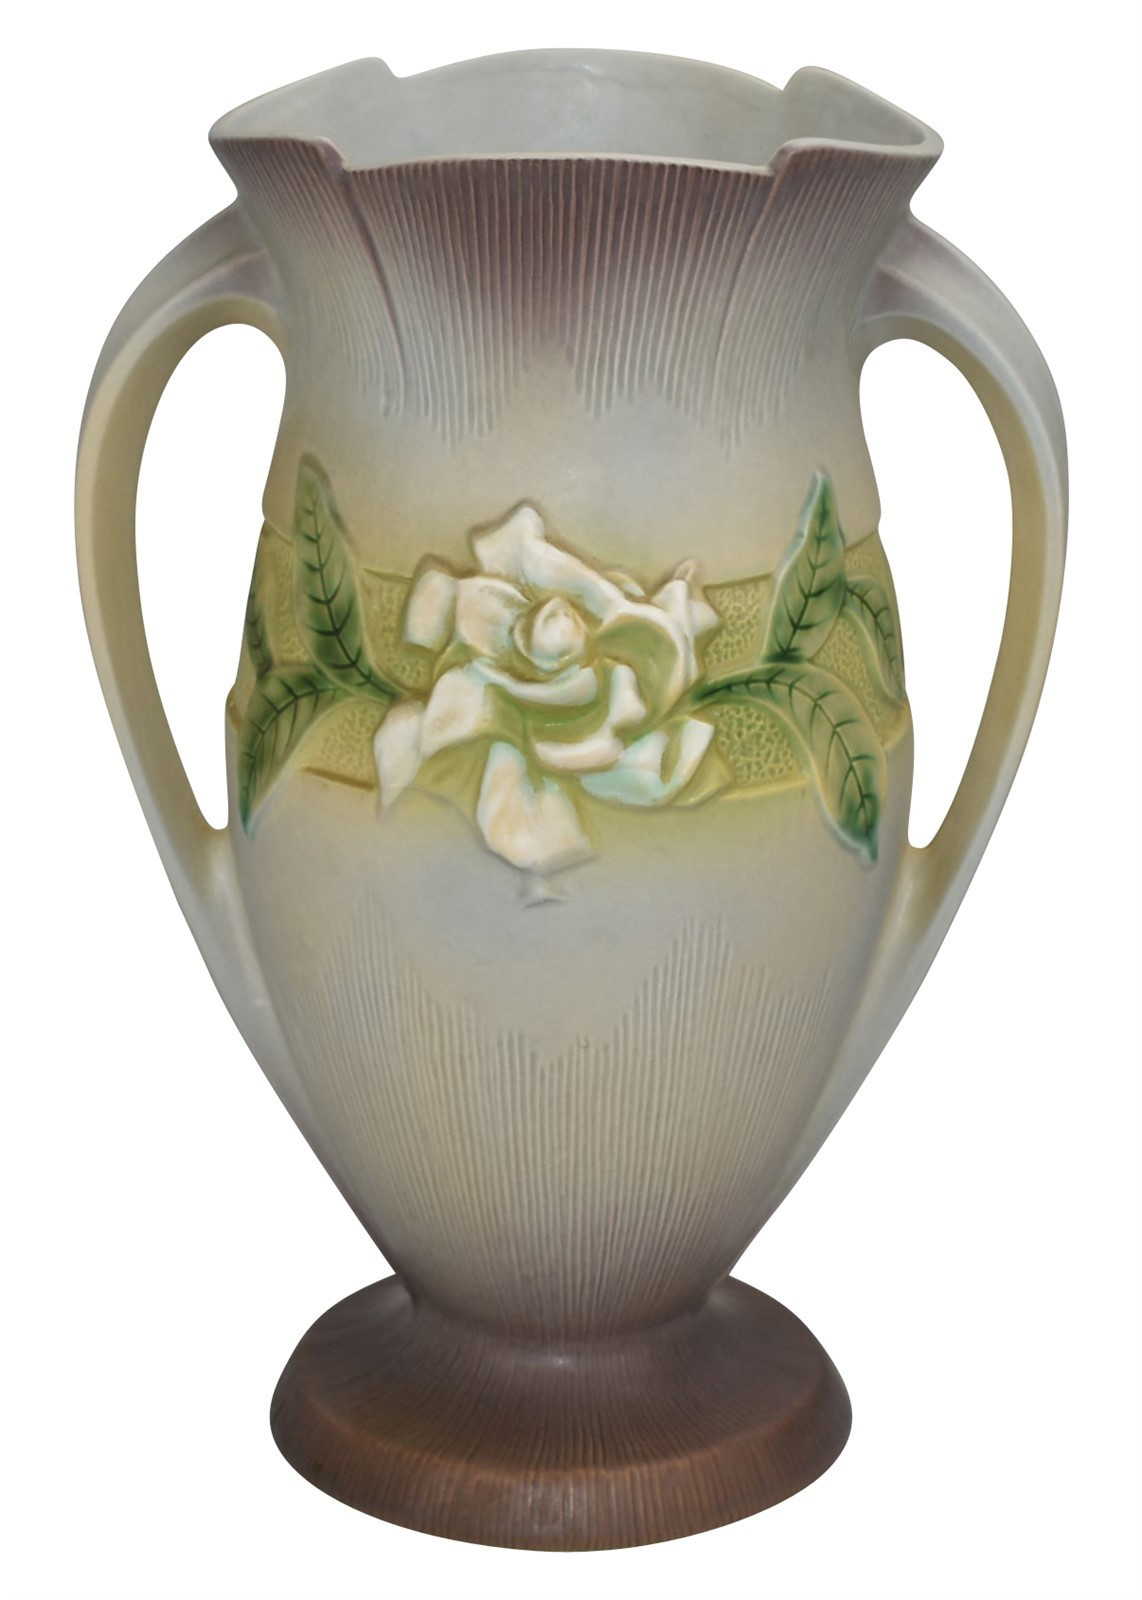 17 Unique Roseville Snowberry Vase 2022 free download roseville snowberry vase of roseville pottery gardenia gray vase 689 14 just art pottery from pertaining to roseville pottery gardenia gray vase 689 14